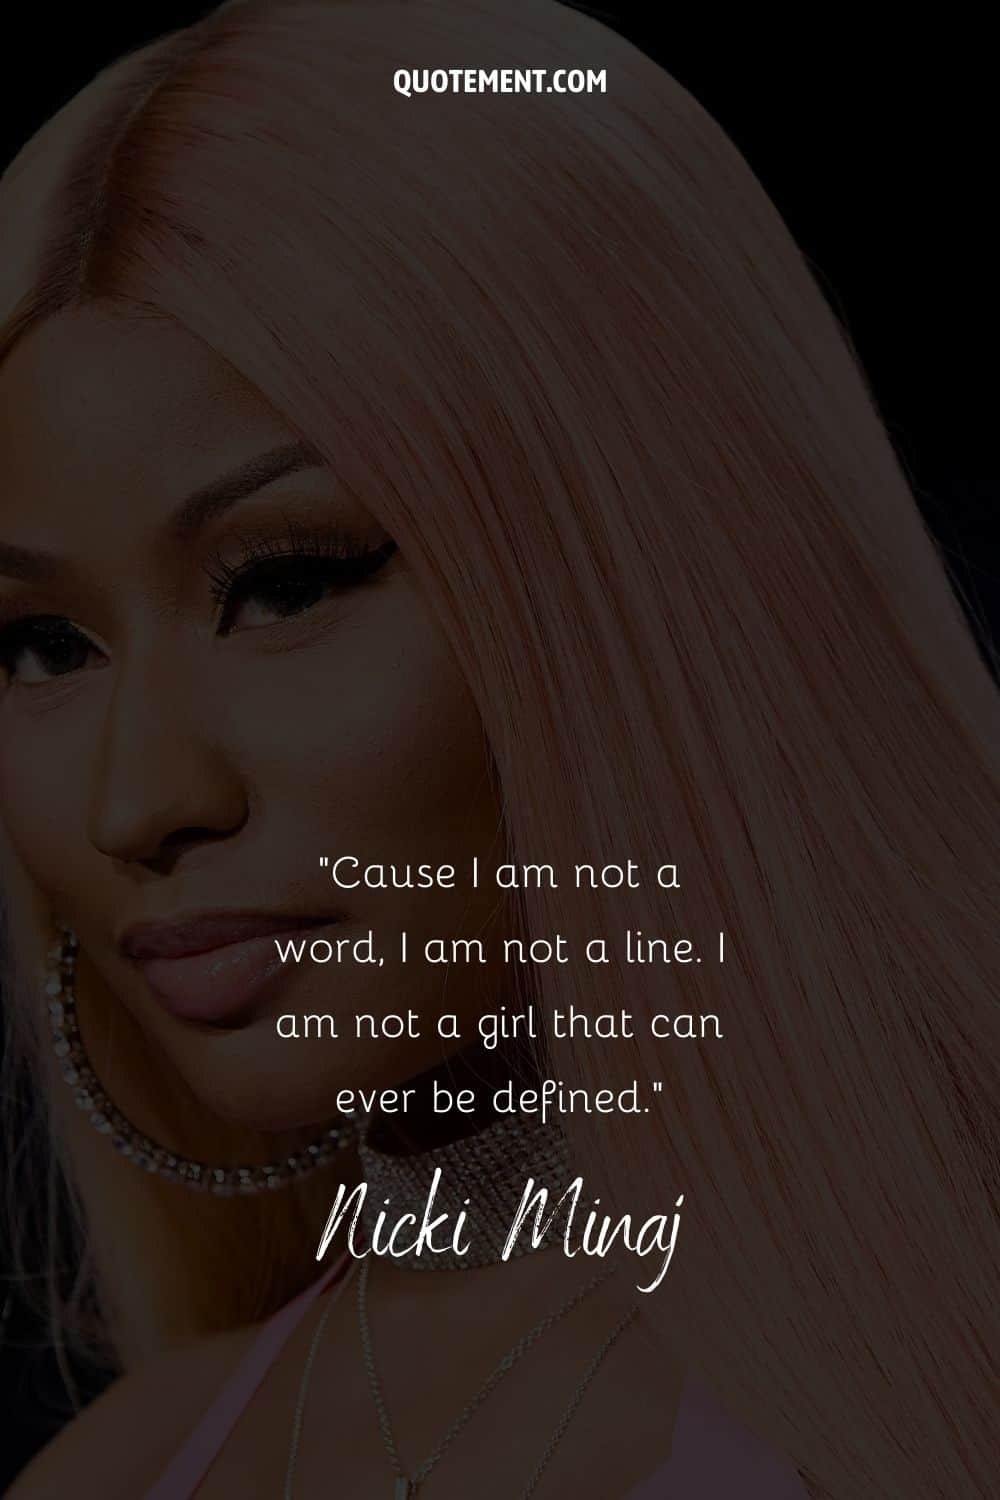 Sassy quote by Nicki and her photo in the background